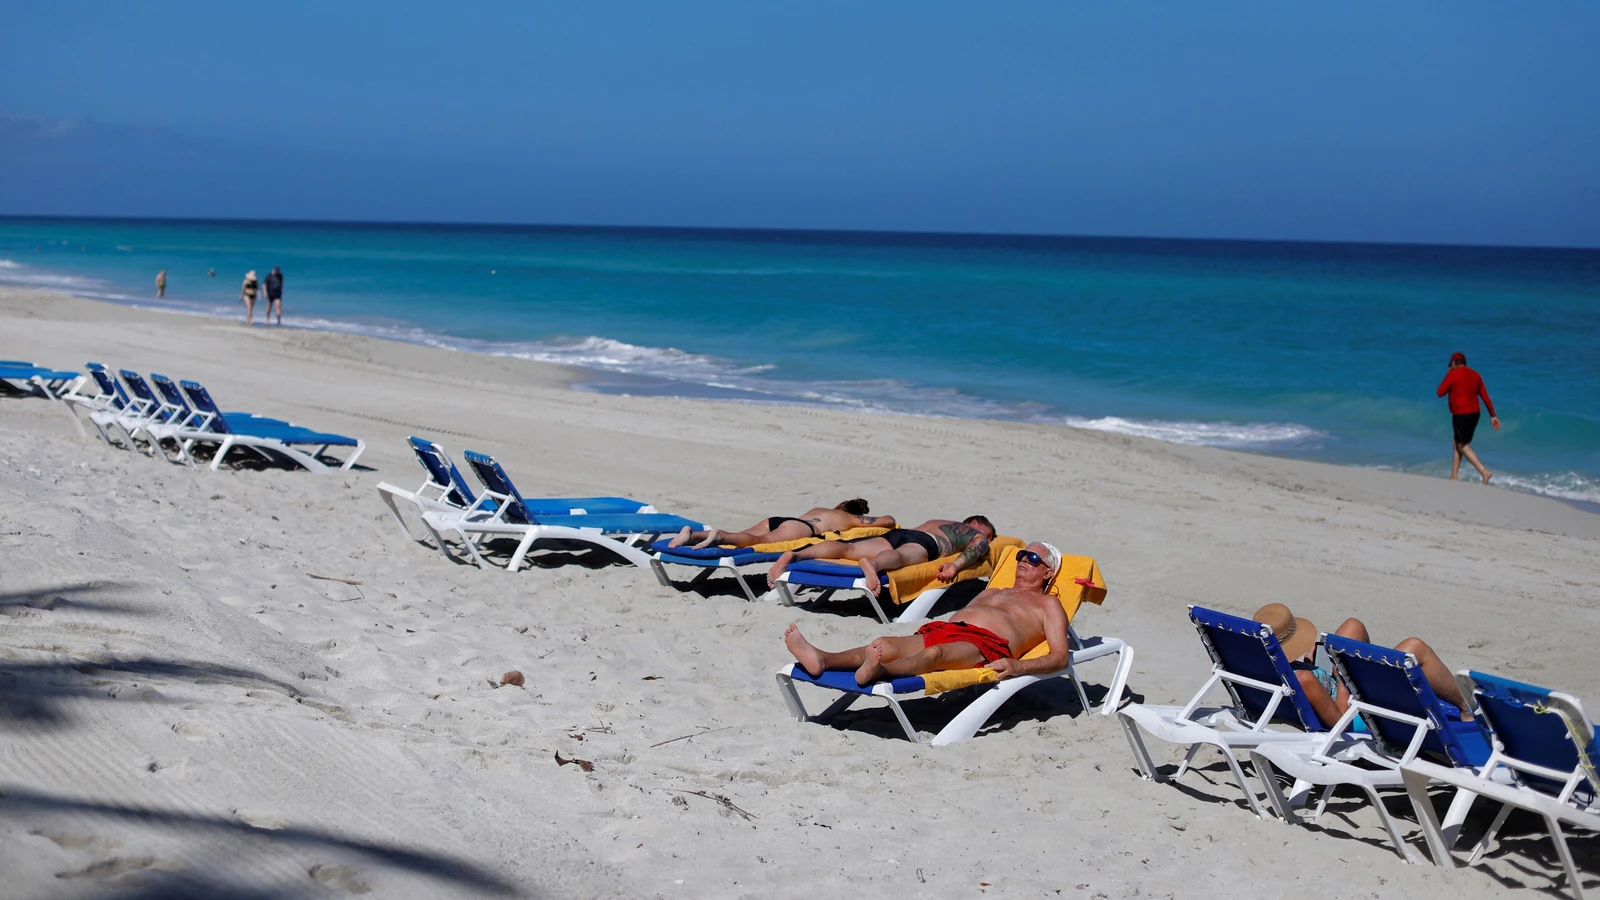 Cuba beaches in doubt of tourism recovery as Russian tourists leave